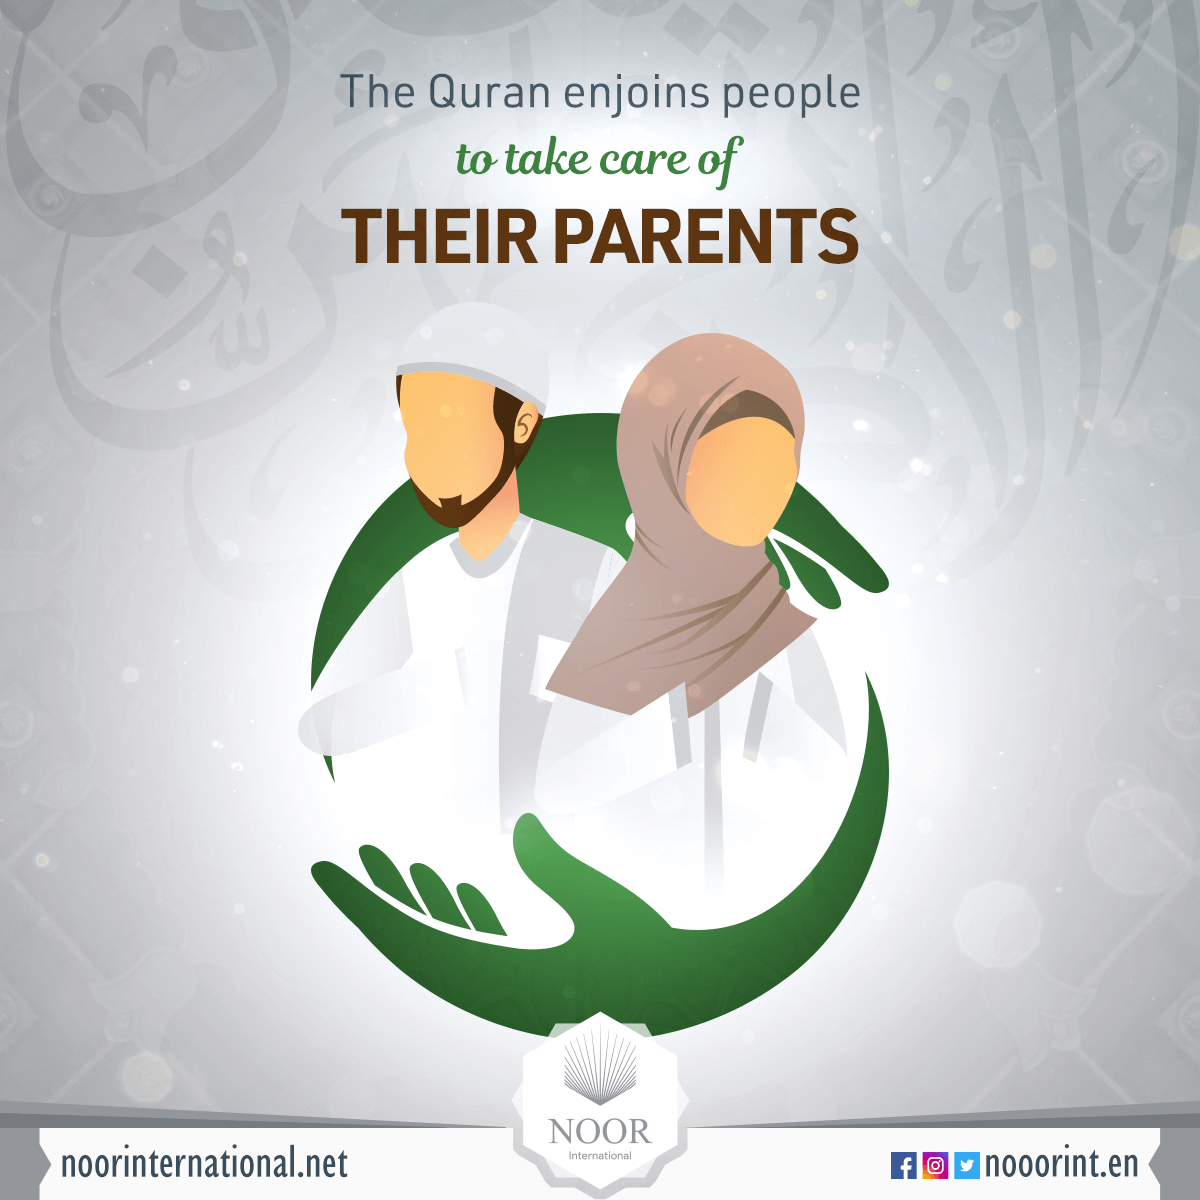 The Quran enjoins people to take care of their parents